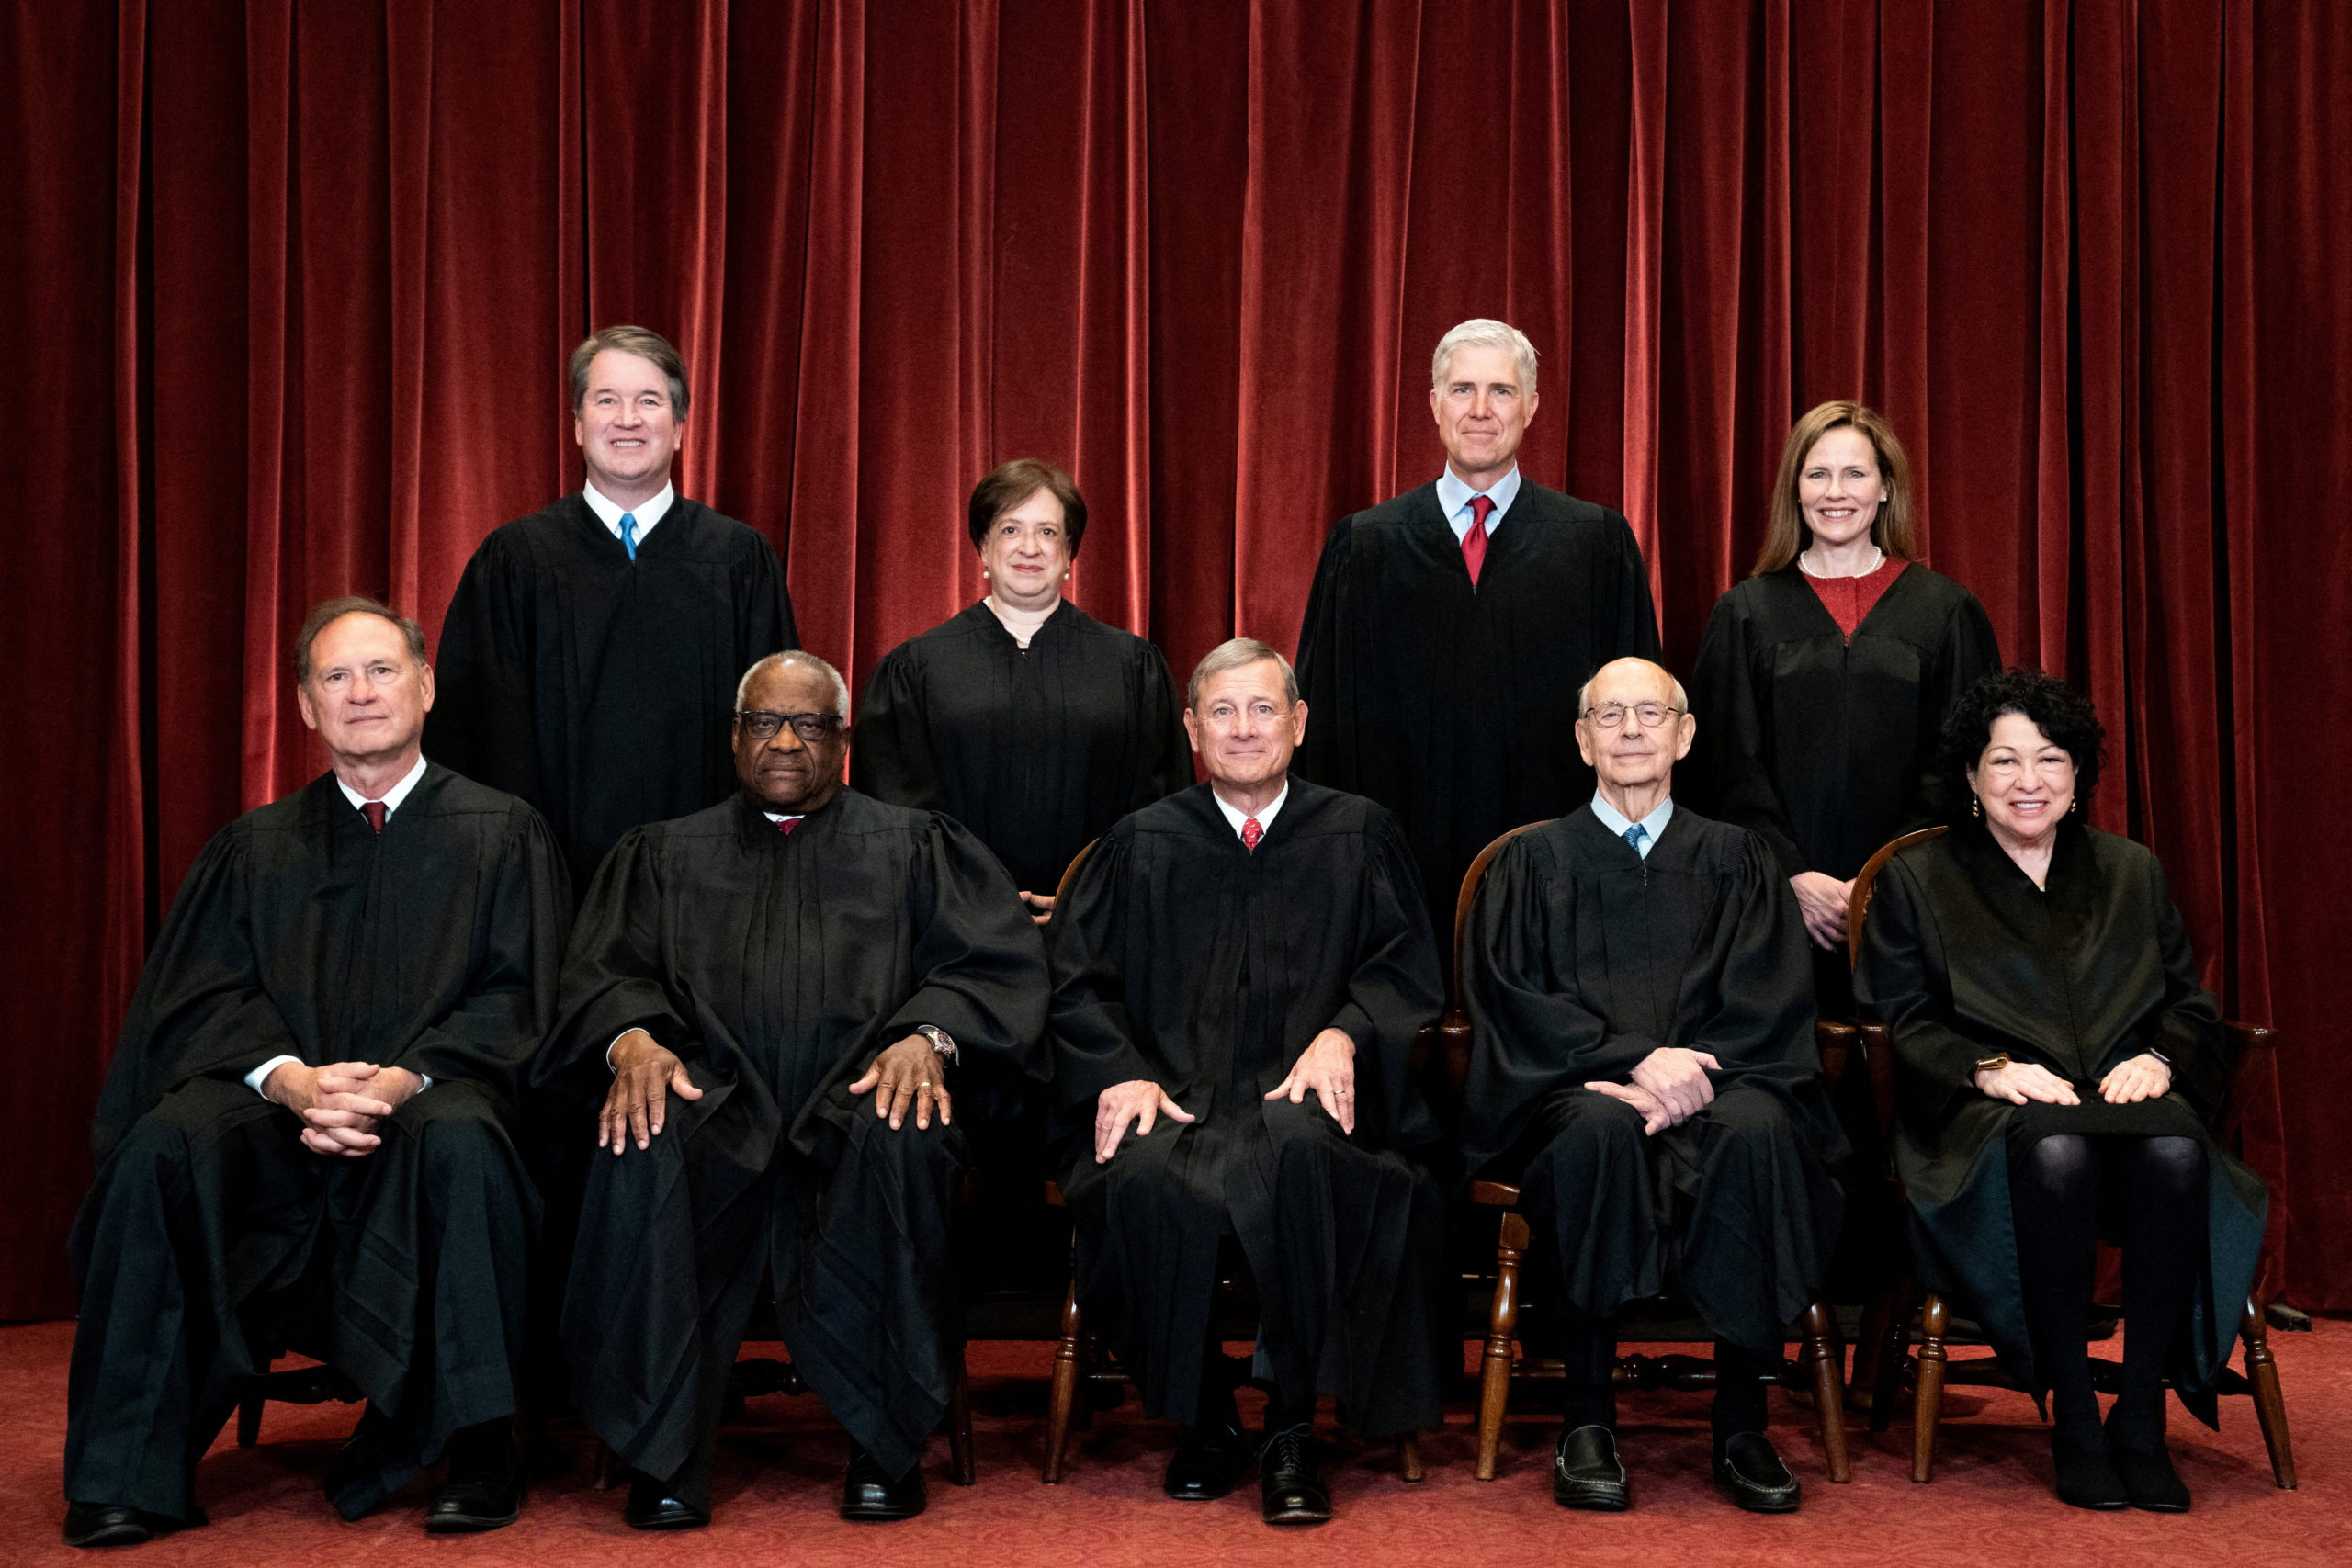 FILE PHOTO: Associate Justice Brett Kavanaugh, Associate Justice Elena Kagan, Associate Justice Neil Gorsuch, Associate Justice Amy Coney Barrett, Associate Justice Samuel Alito, Associate Justice Clarence Thomas, Chief Justice John Roberts, Associate Justice Stephen Breyer and Associate Justice Sonia Sotomayor pose for a group photo at the Supreme Court in Washington, U.S., April 23, 2021. Erin Schaff/Pool via REUTERS/File Photo